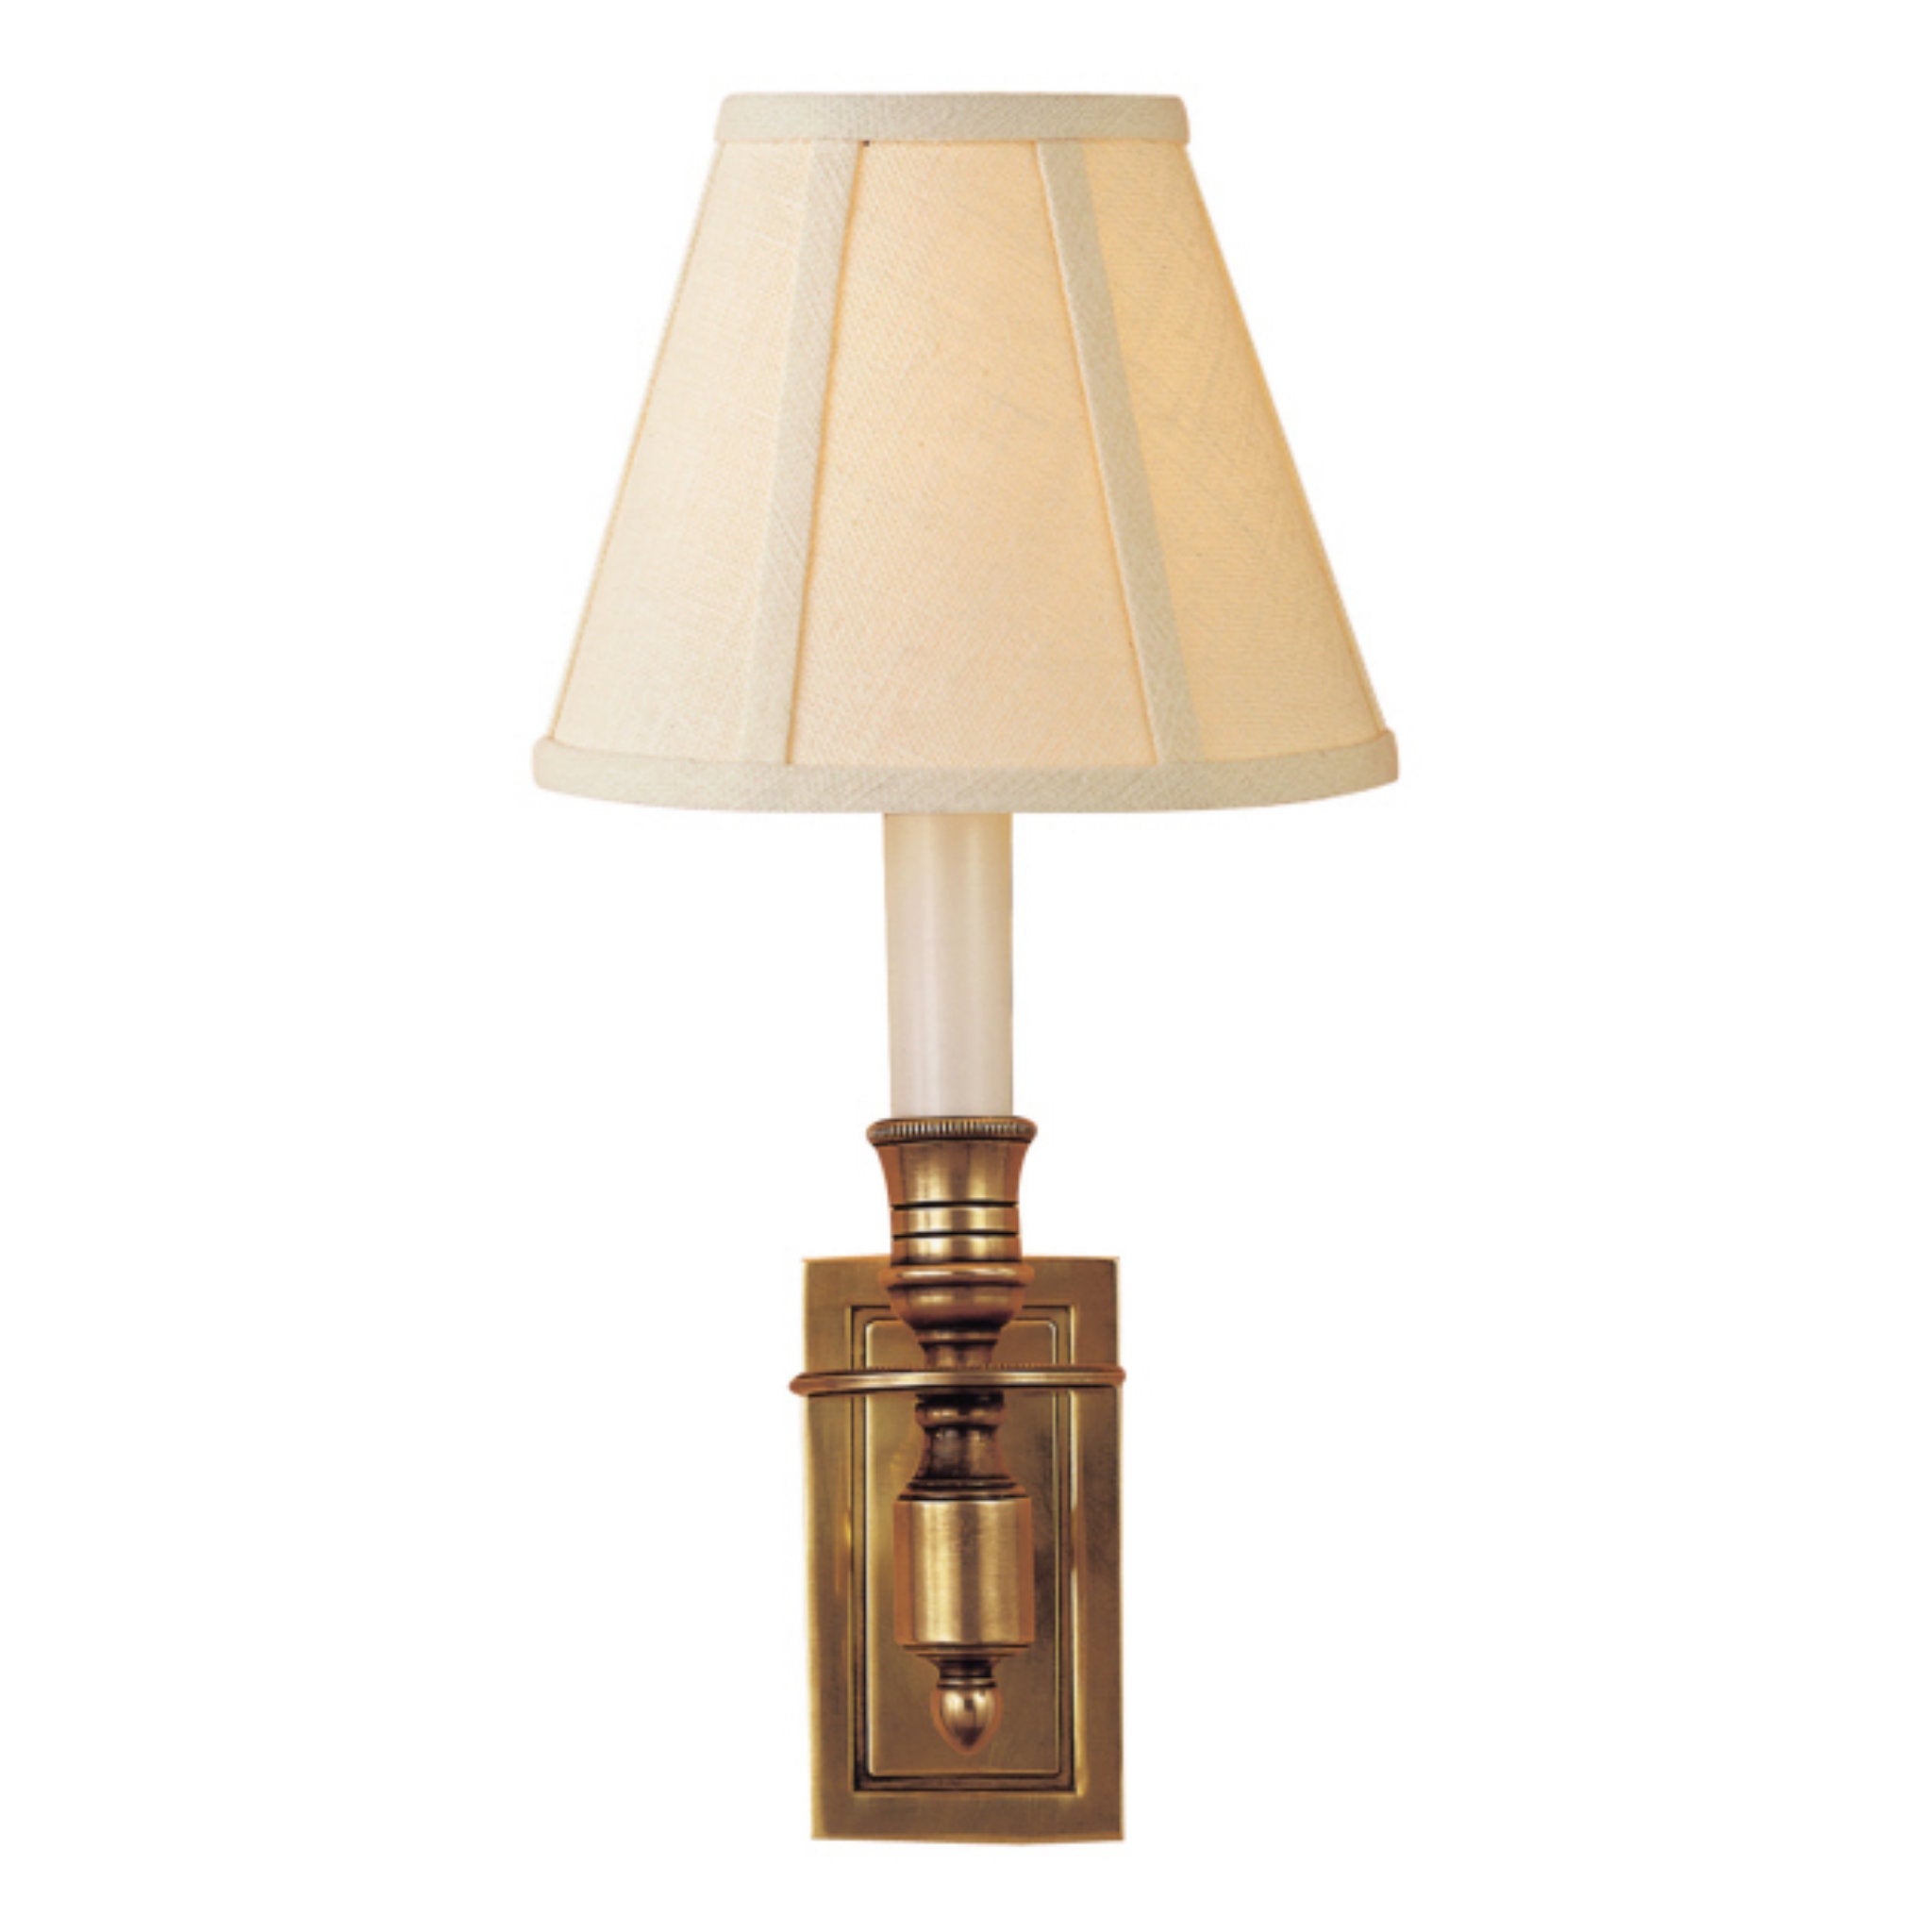 Visual Comfort French Single Library Sconce in Hand-Rubbed Antique Brass with Linen Shade